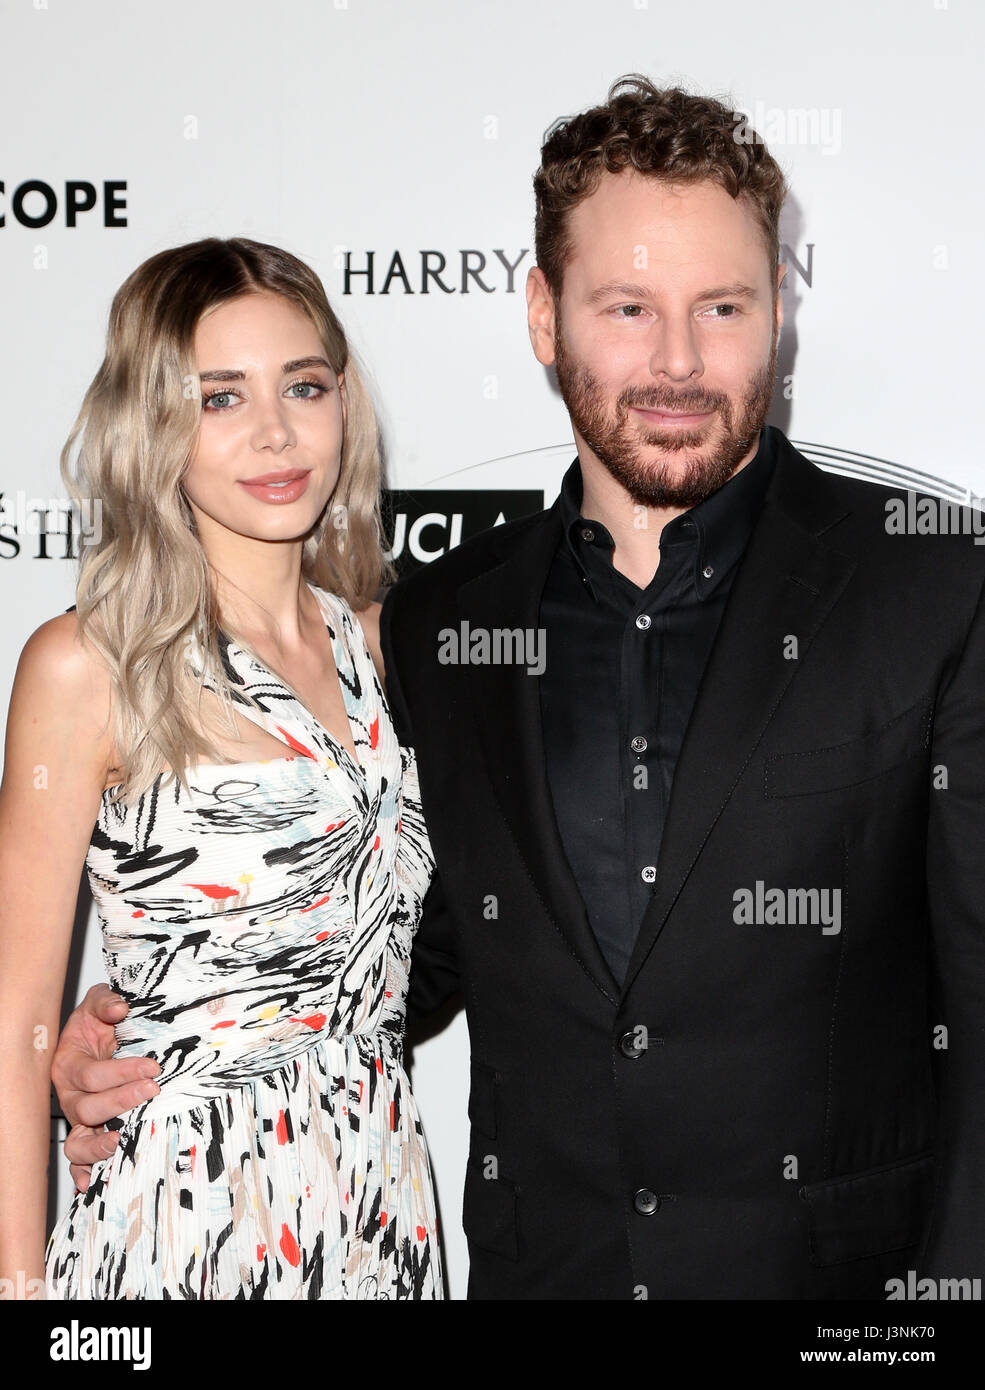 Culver City, Ca. 6th May, 2017. Alexandra Lenas, Sean Parker, At UCLA Mattel Children's Hospital's Kaleidoscope 5 At 3LABS In California on May 6, 2017. Credit: Fs/Media Punch/Alamy Live News Stock Photo